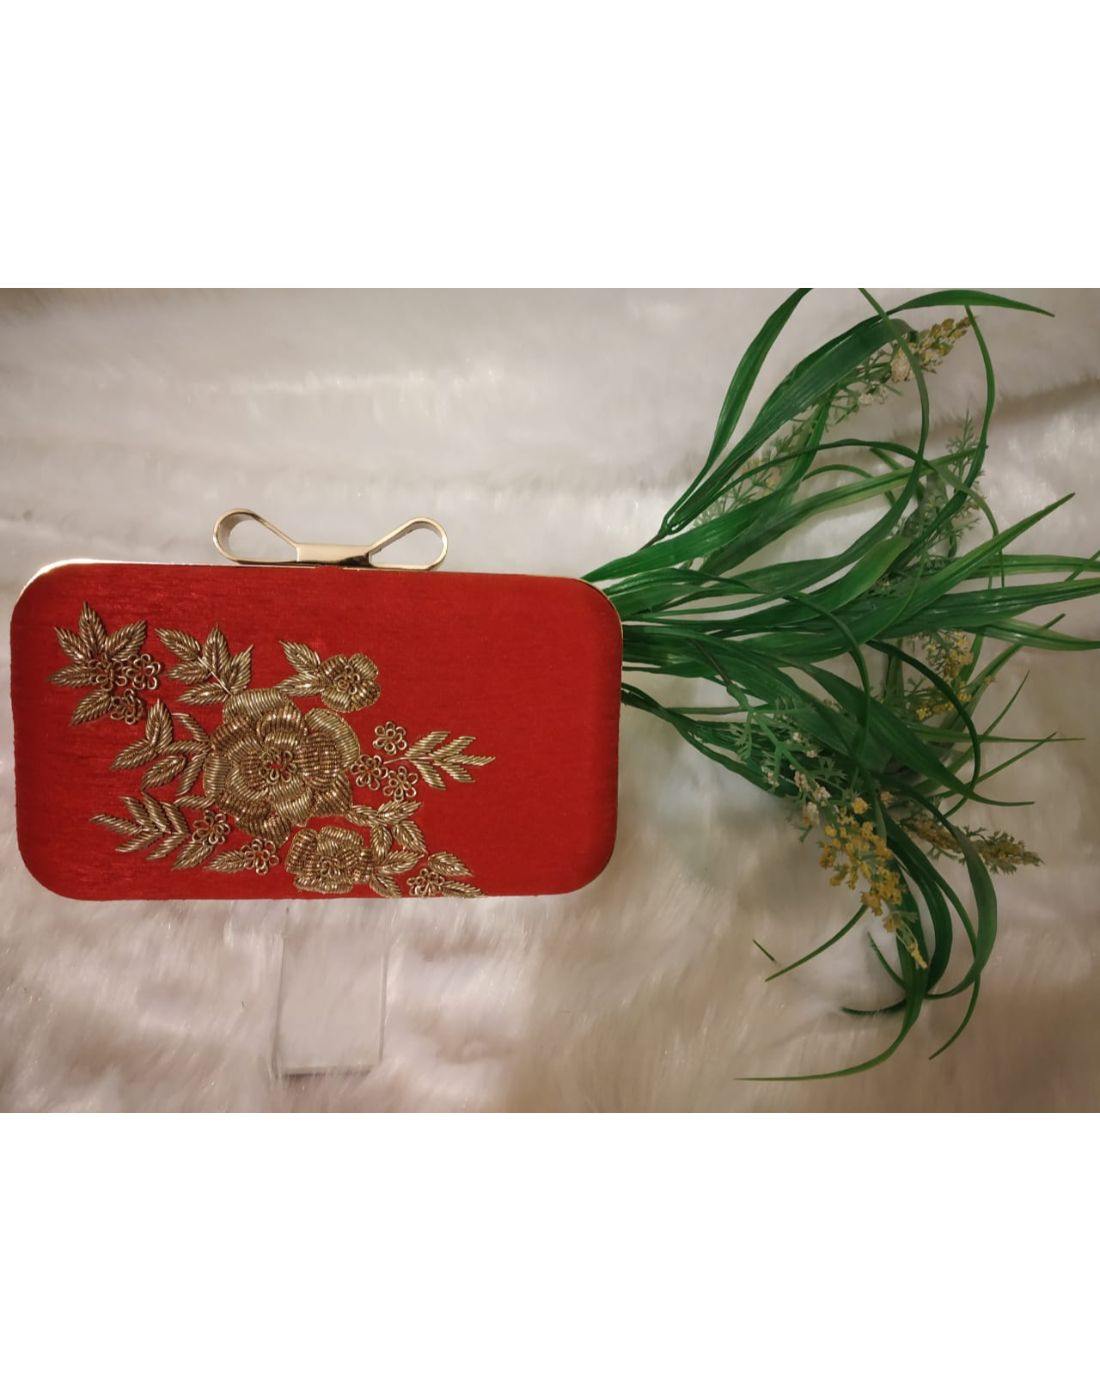 DN Enterprises Handicraft Party Wear Hand Embroidered Box Clutch Bag Purse  For Bridal, Casual, Party, Wedding(red)